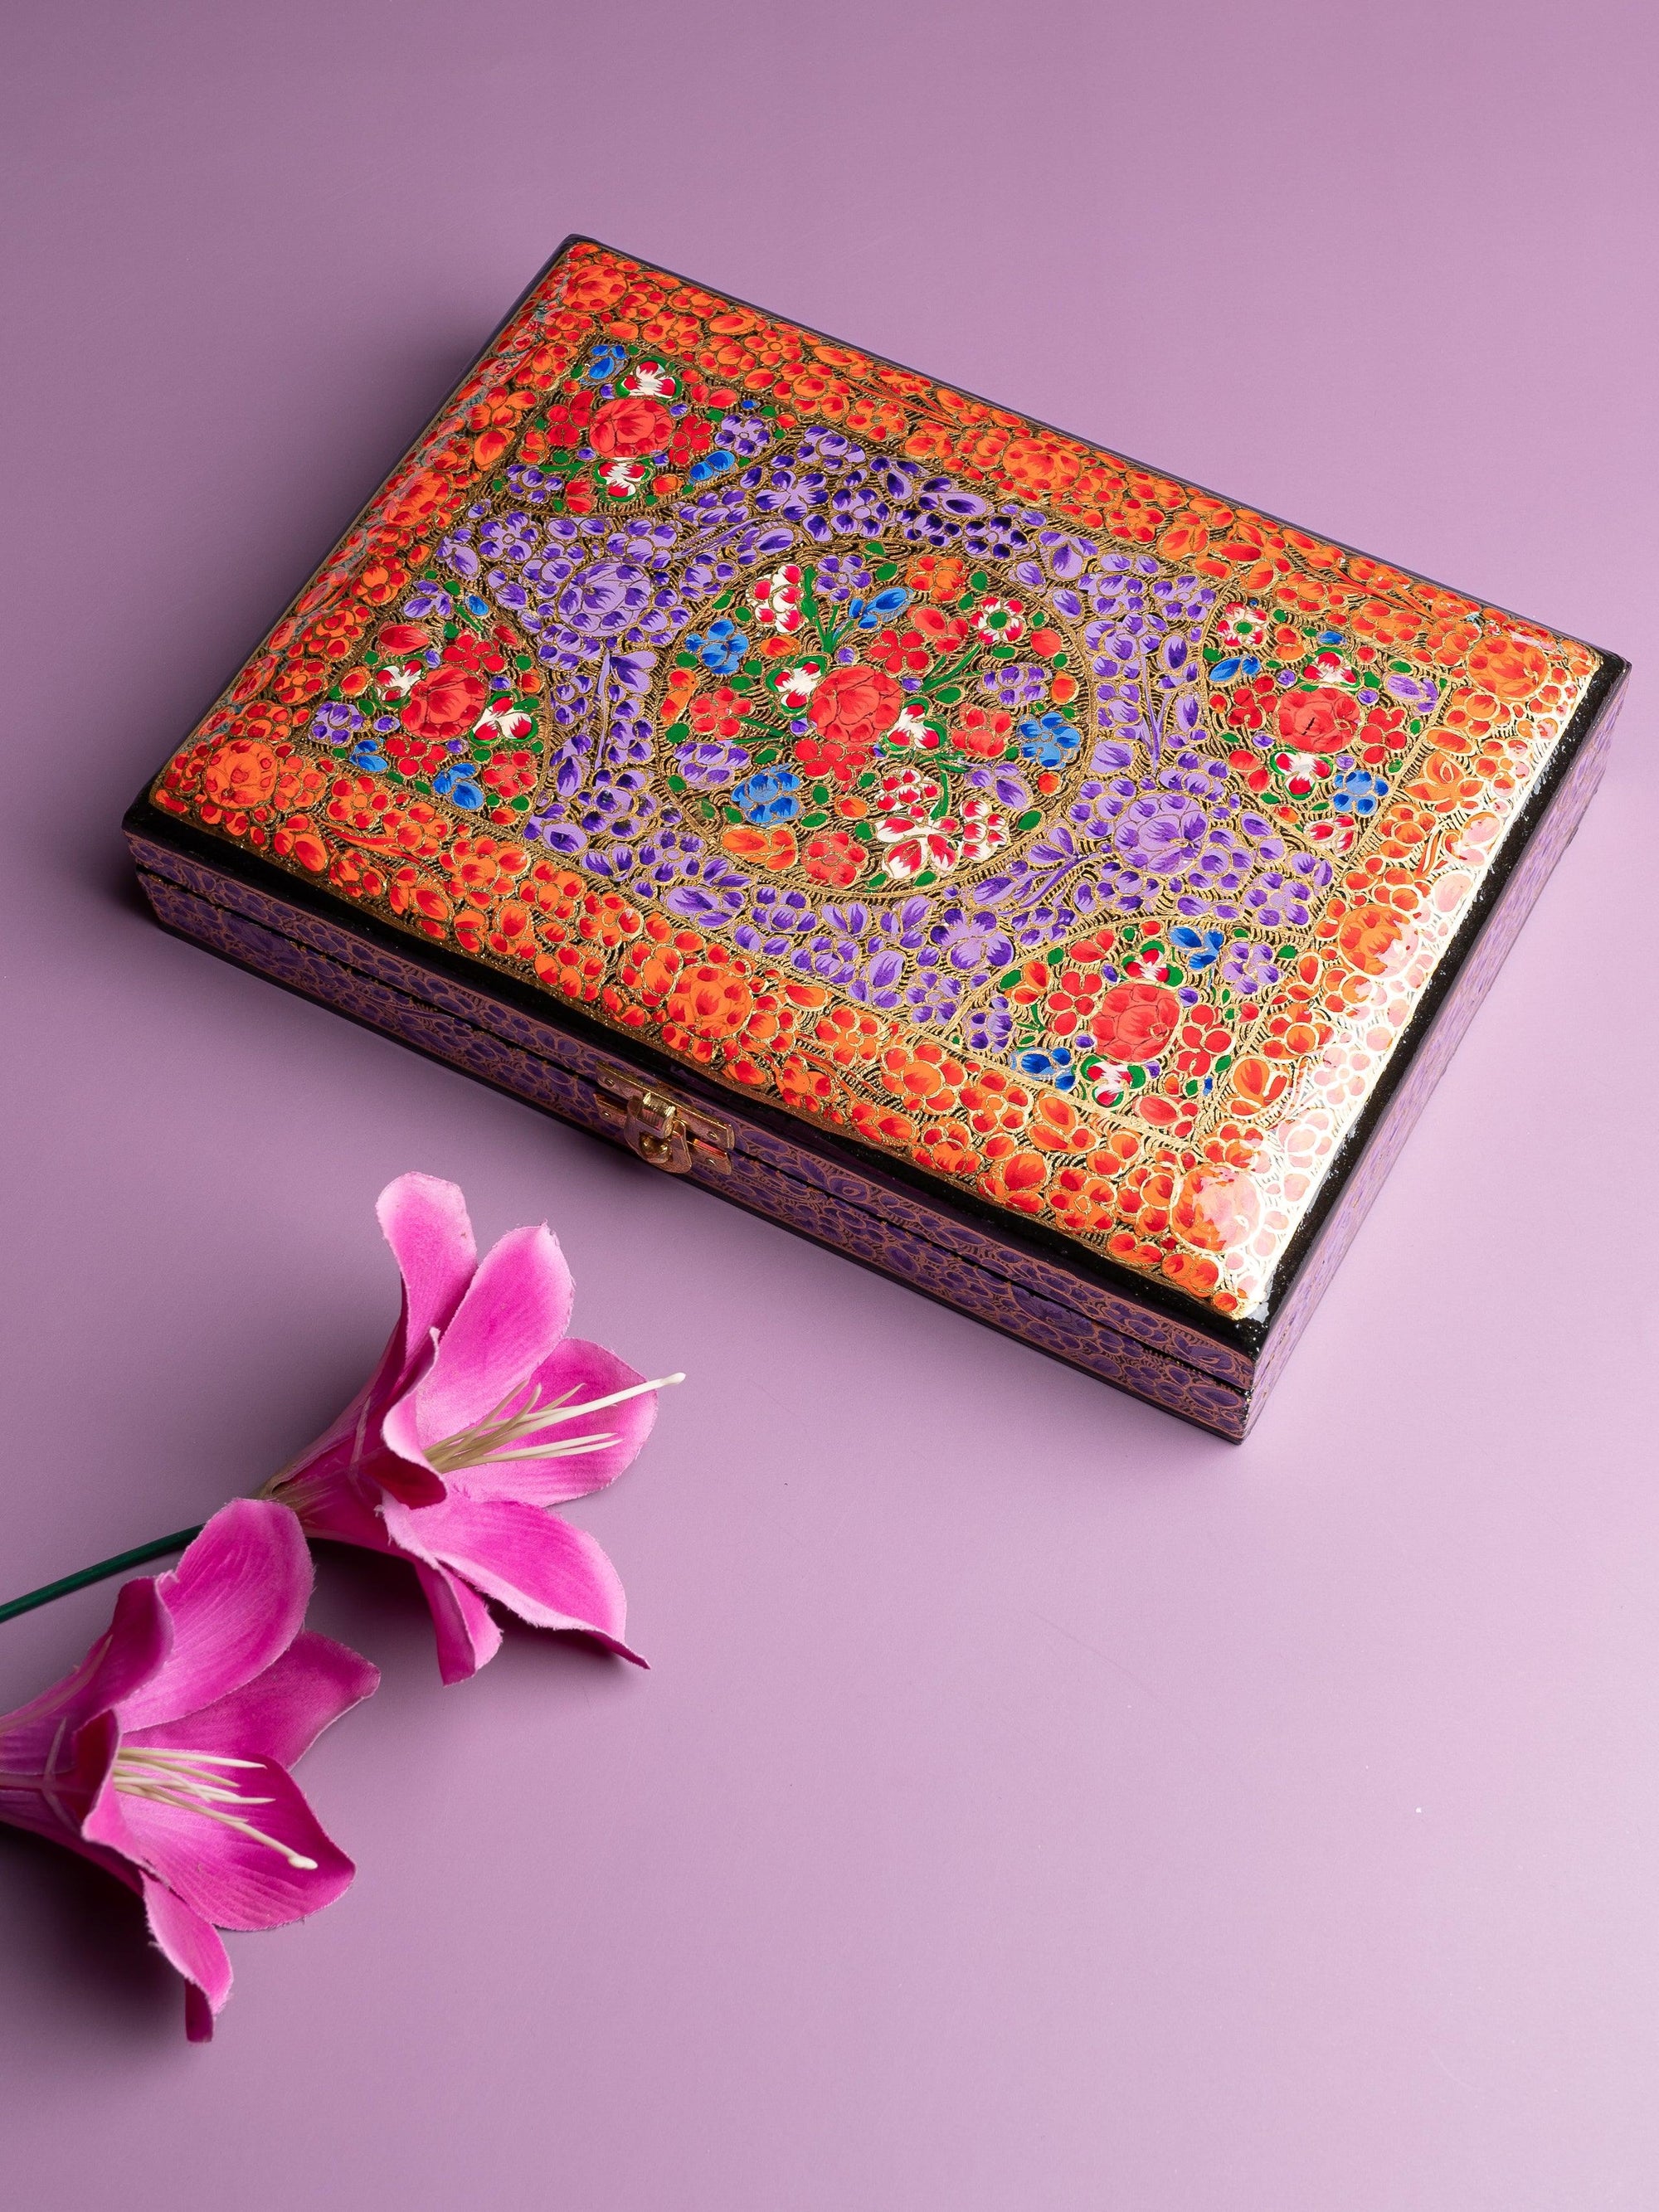 Paper Mache Rectangular Jewellery box, Available in Assorted design and colors - The Heritage Artifacts